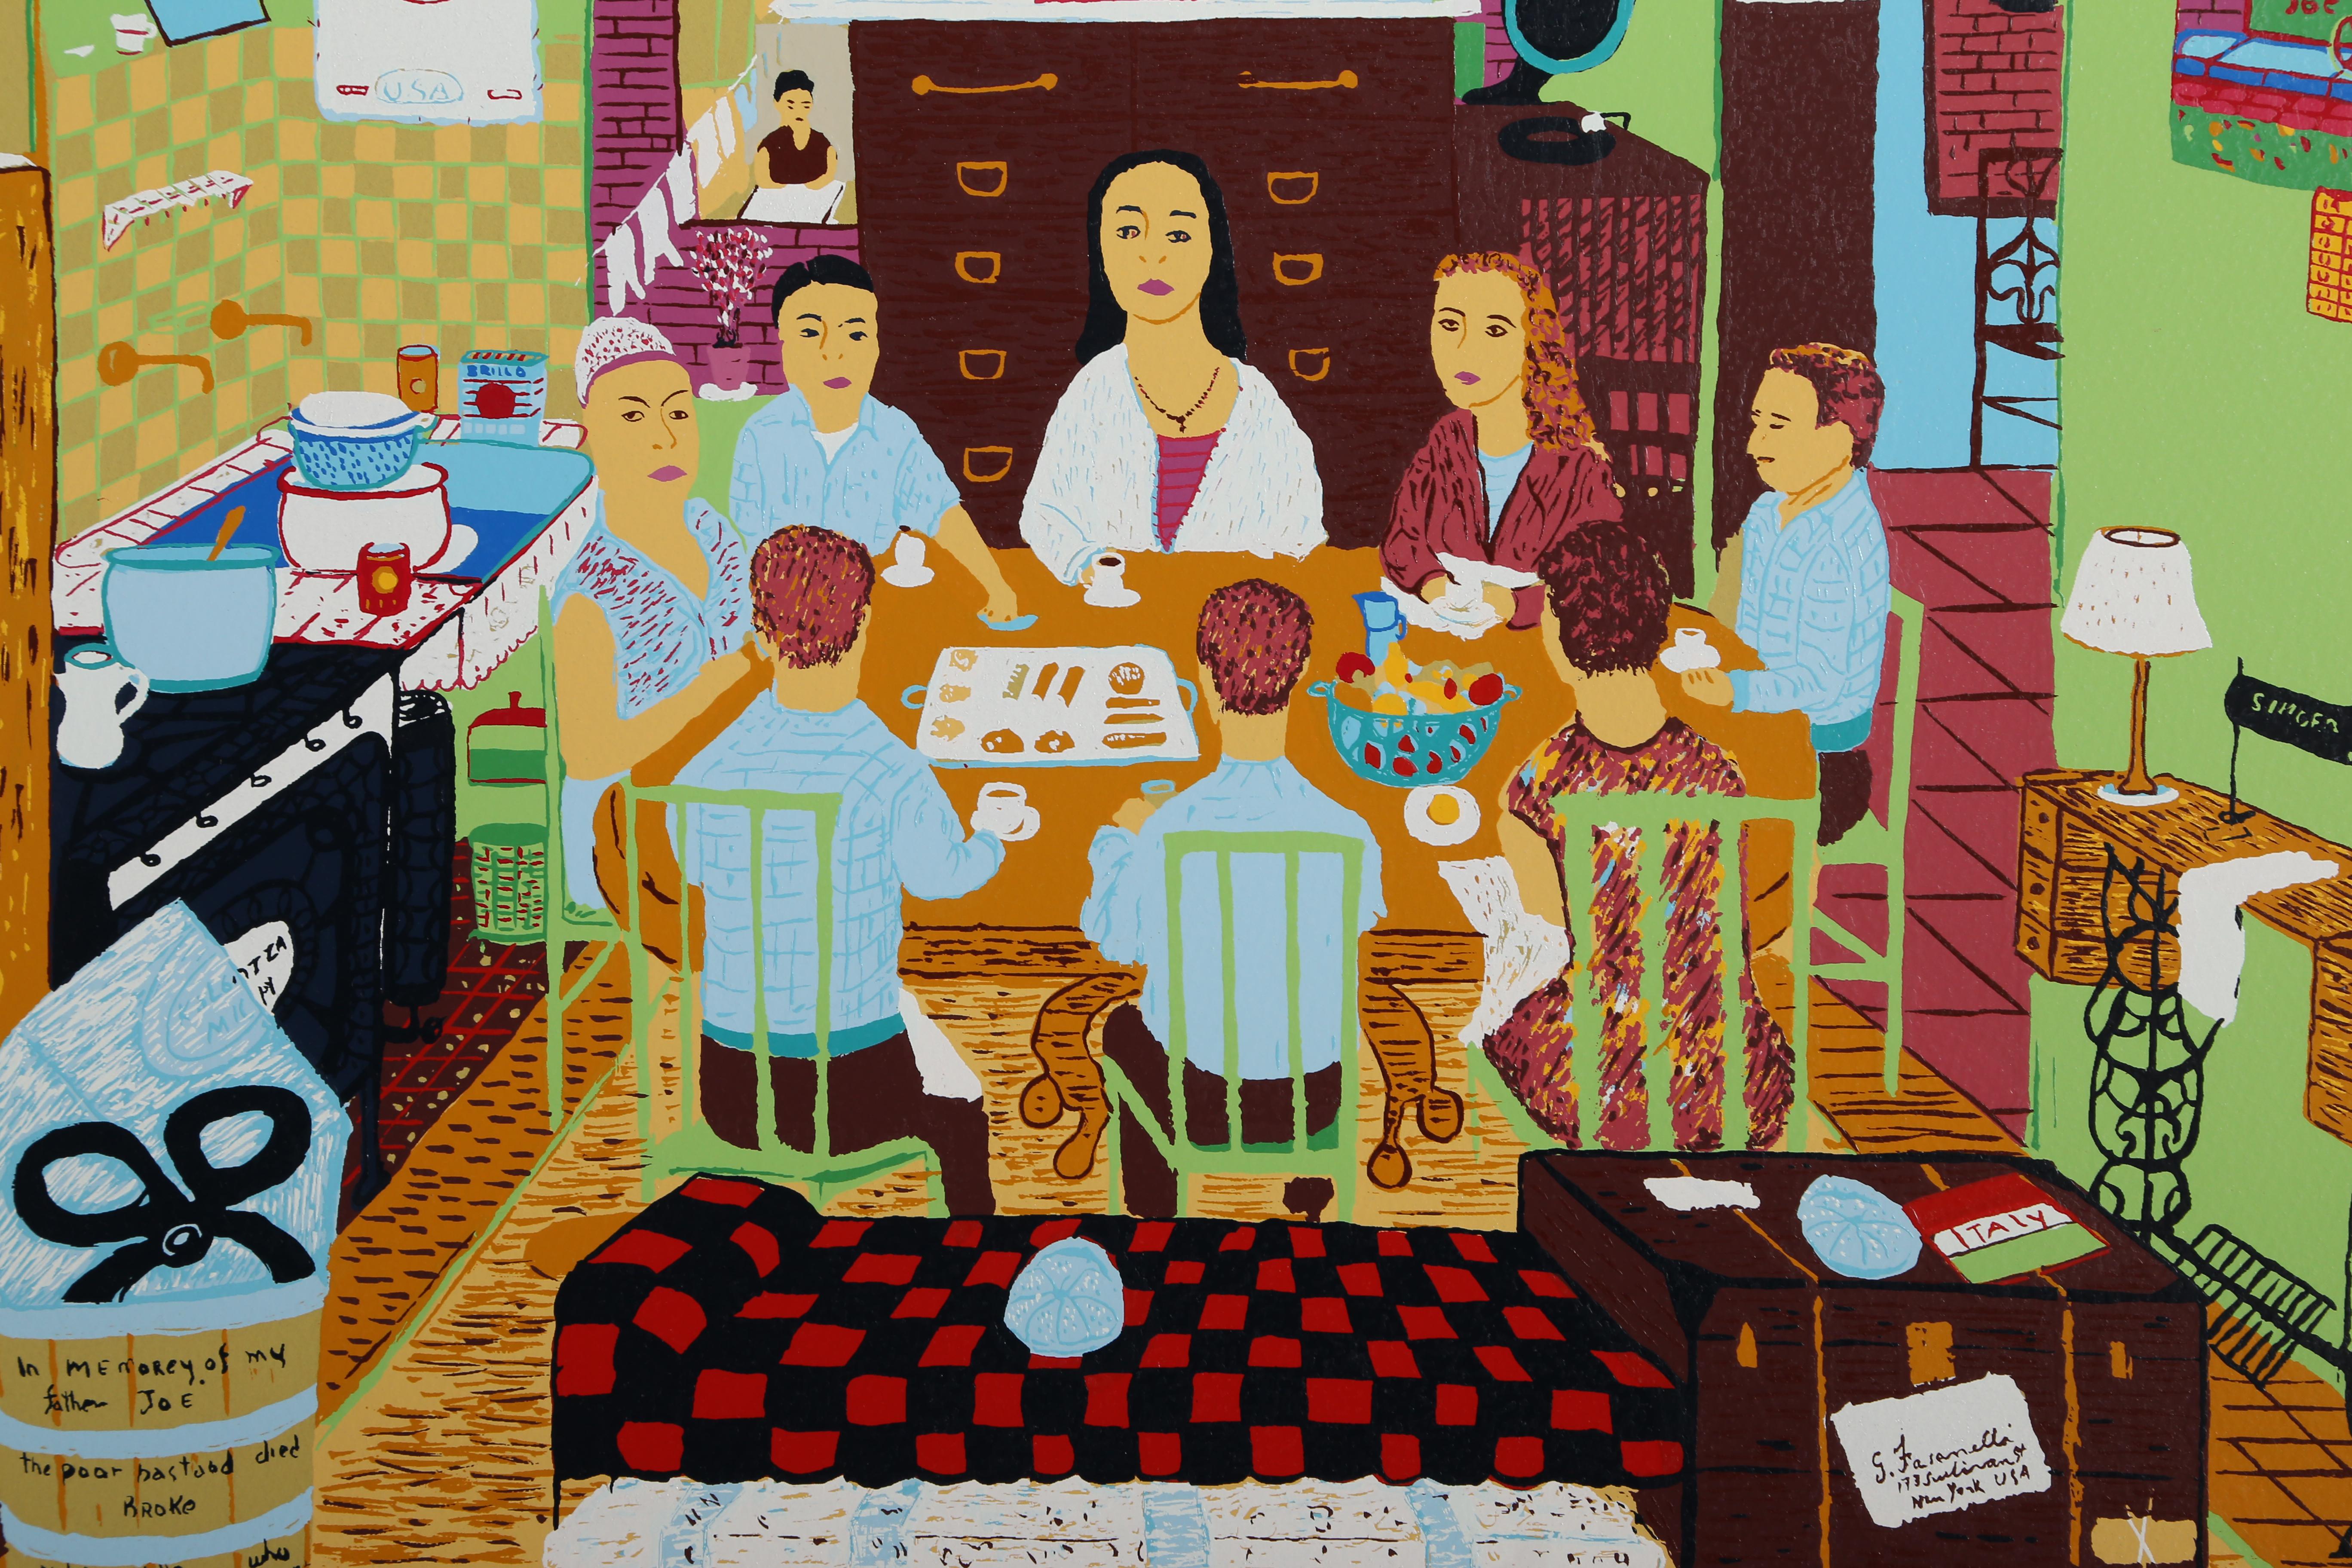 Artist: Ralph Fasanella, American (1914 - 1997)
Title: Family Supper
Year: 1974
Medium: Screenprint on Arches Paper, signed in pencil
Edition: 250, AP 25
Size: 41 in. x 31 in. (104.14 cm x 78.74 cm)